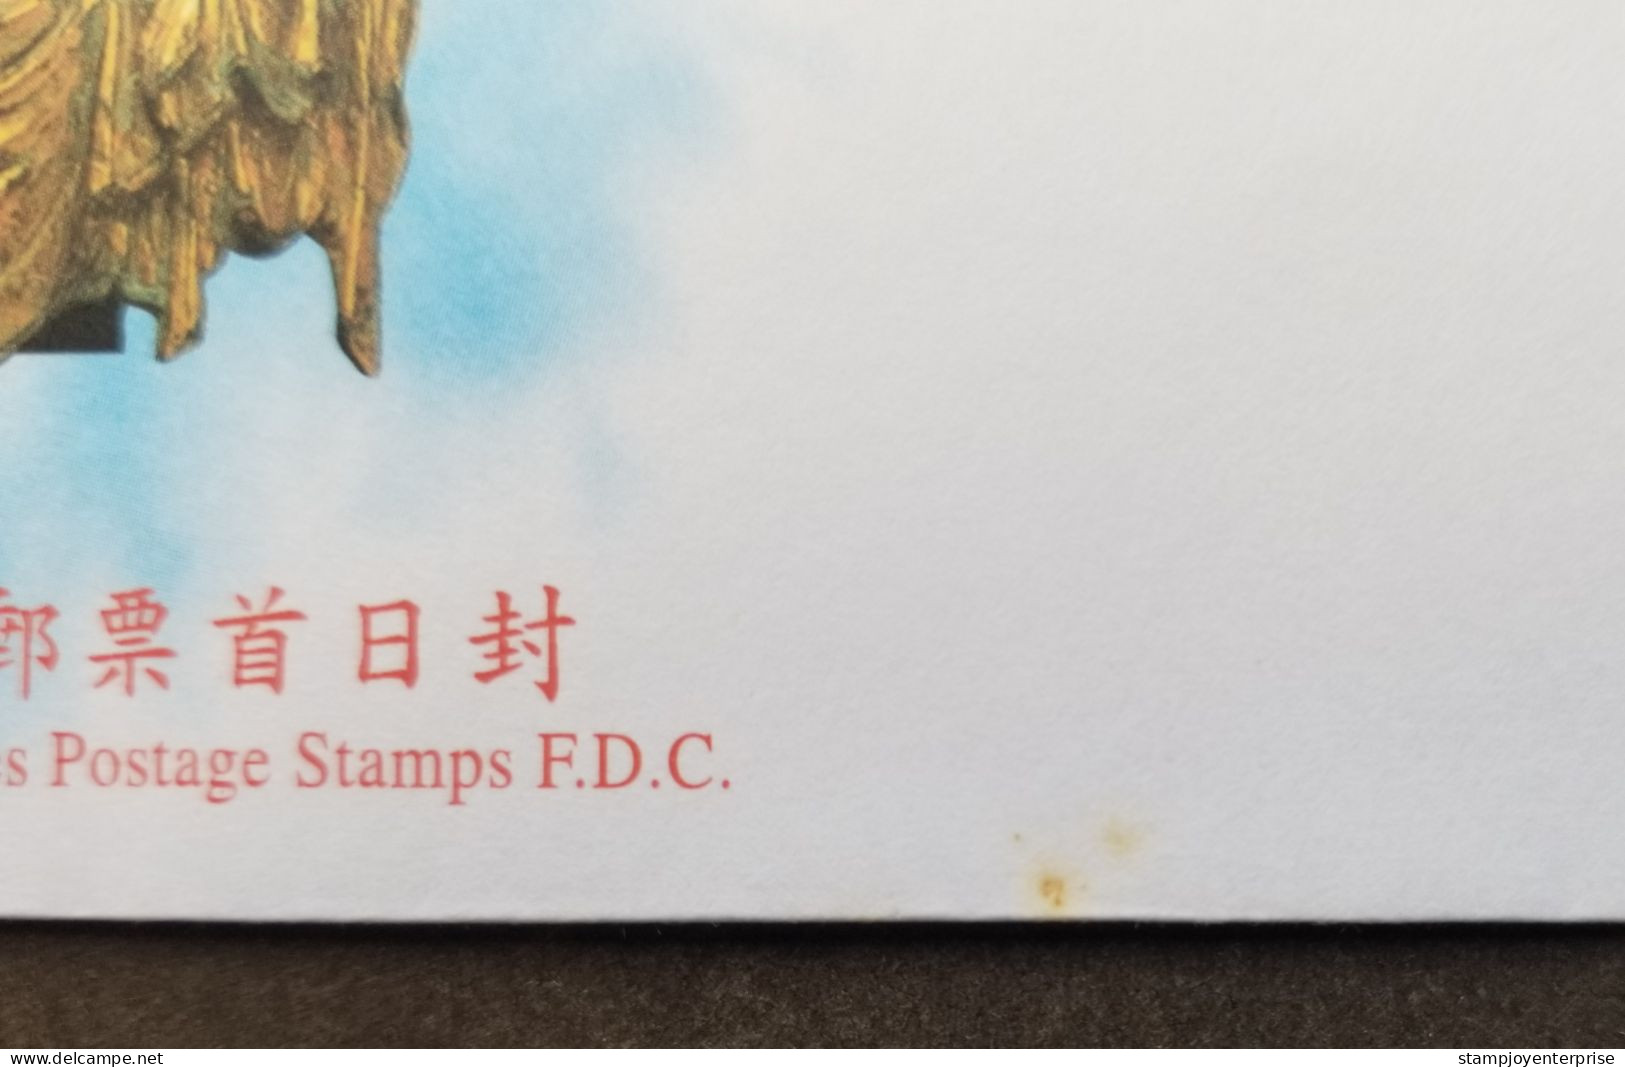 Taiwan Ancient Buddhist Statues 2001 Buddha Religious (stamp FDC) *see Scan - Briefe U. Dokumente